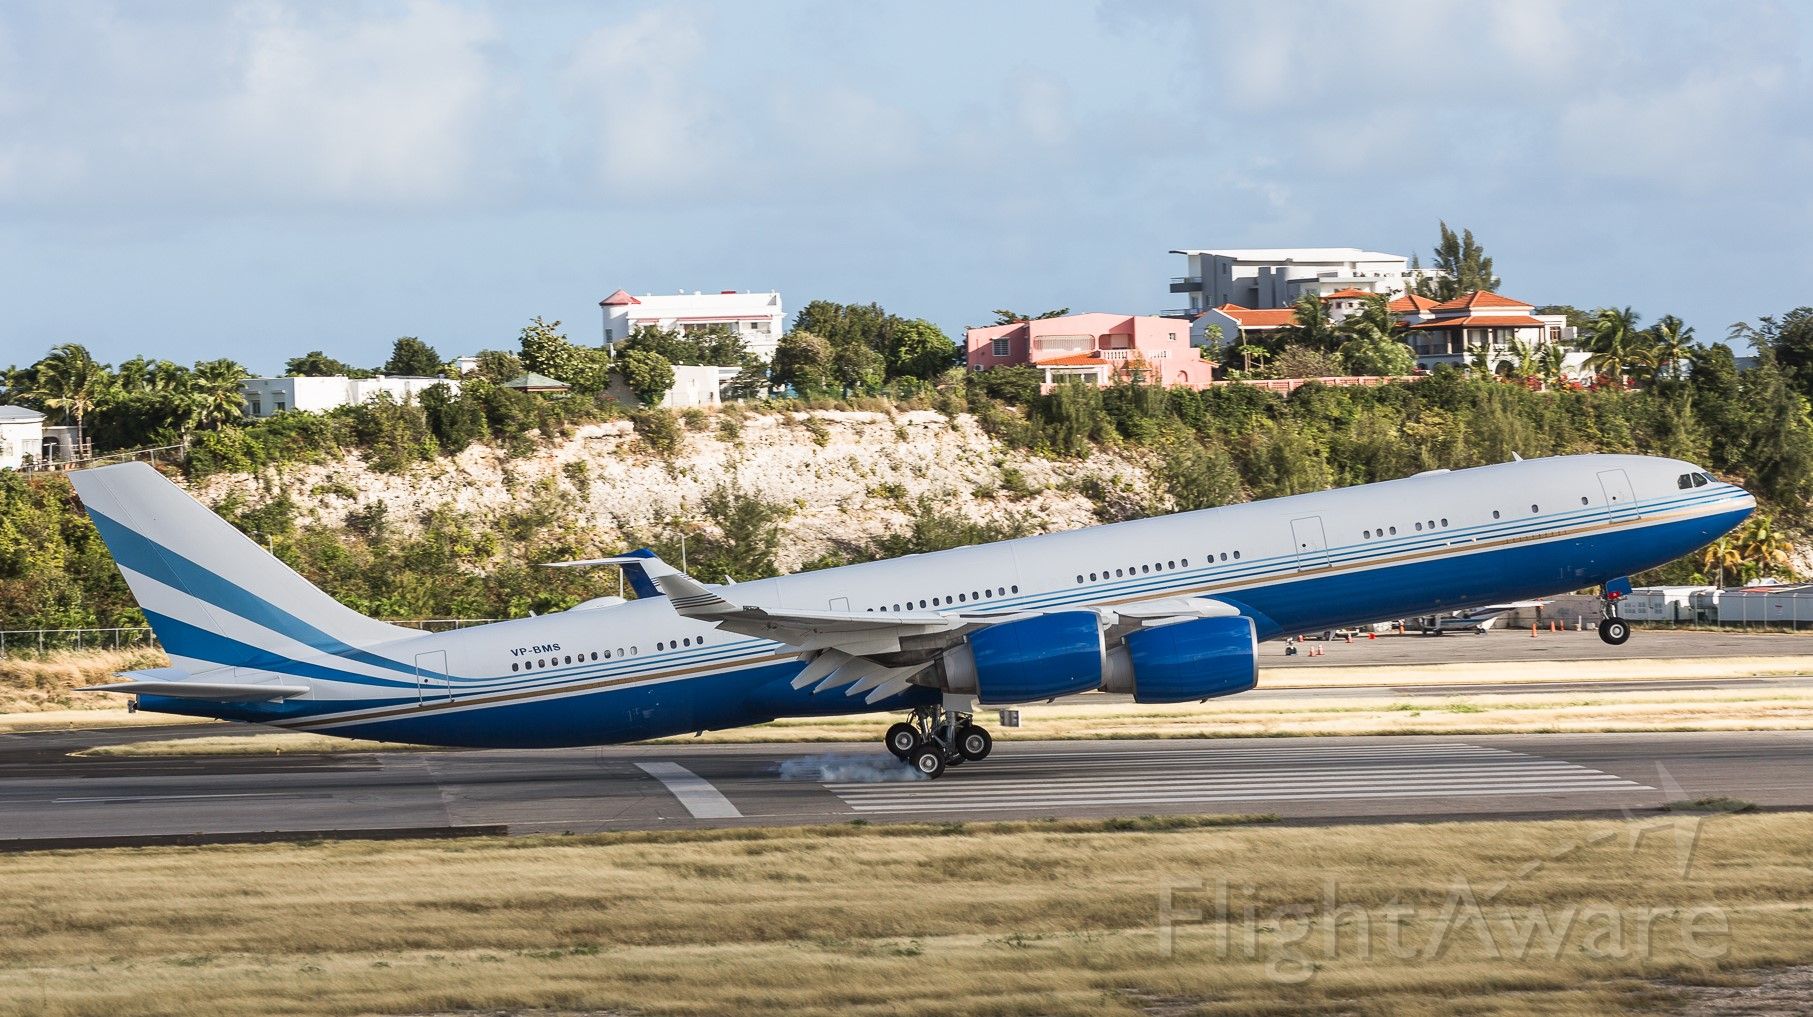 Airbus A340-500 (VP-BMS) - Airbus A340-500 VP-BMS making it look so easy while landing at St Maarten.